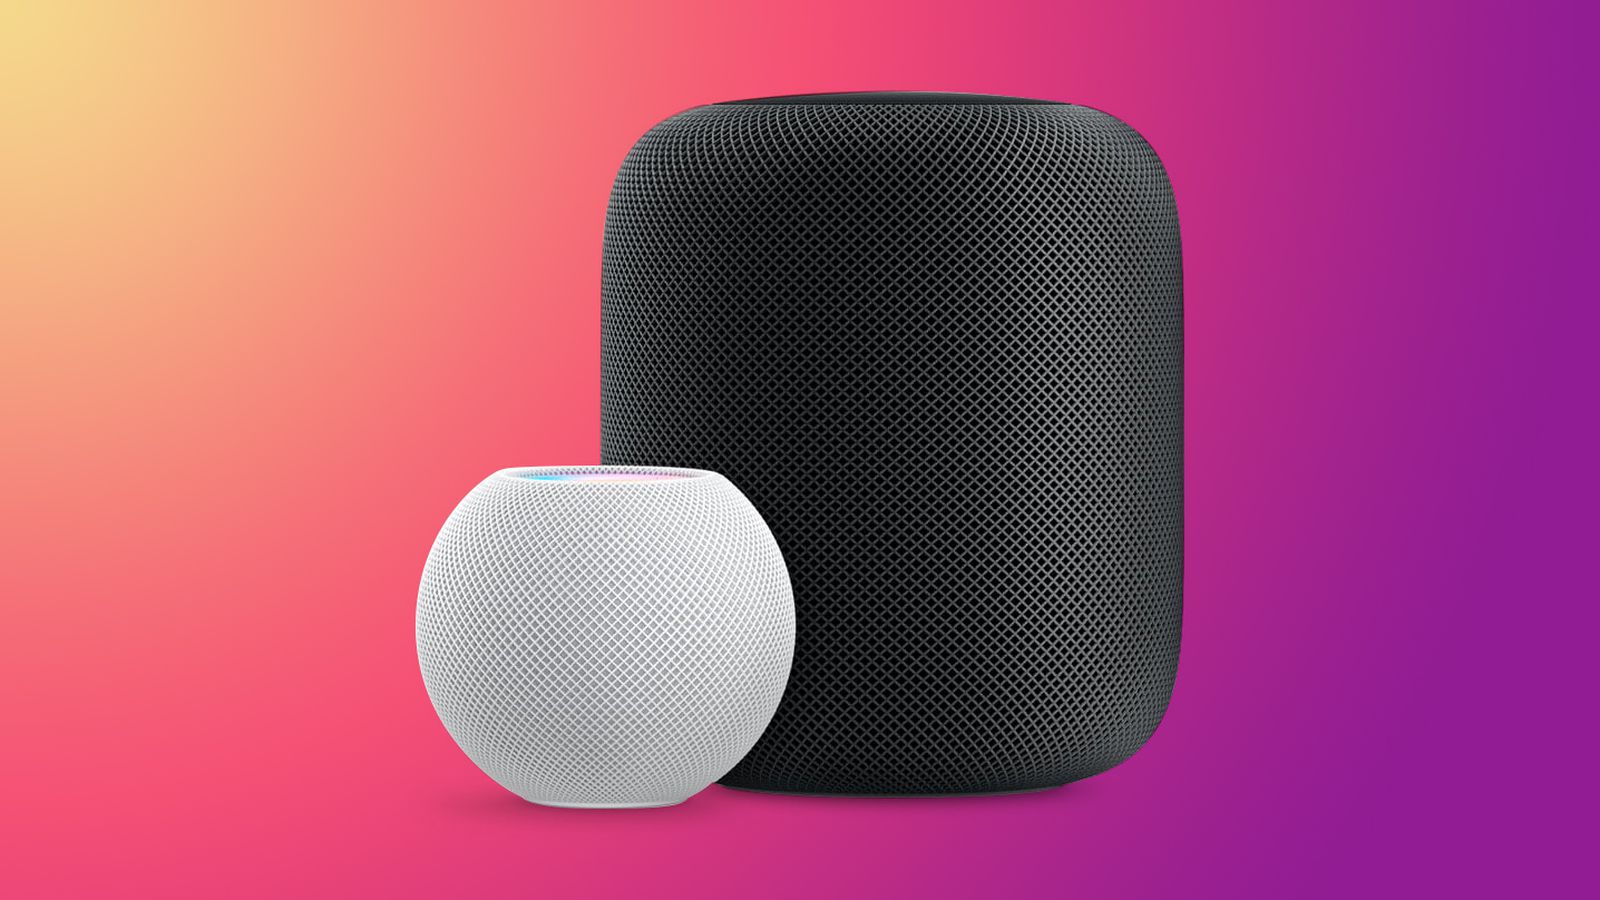 Apple HomePod 2 review: The full-sized HomePod means business